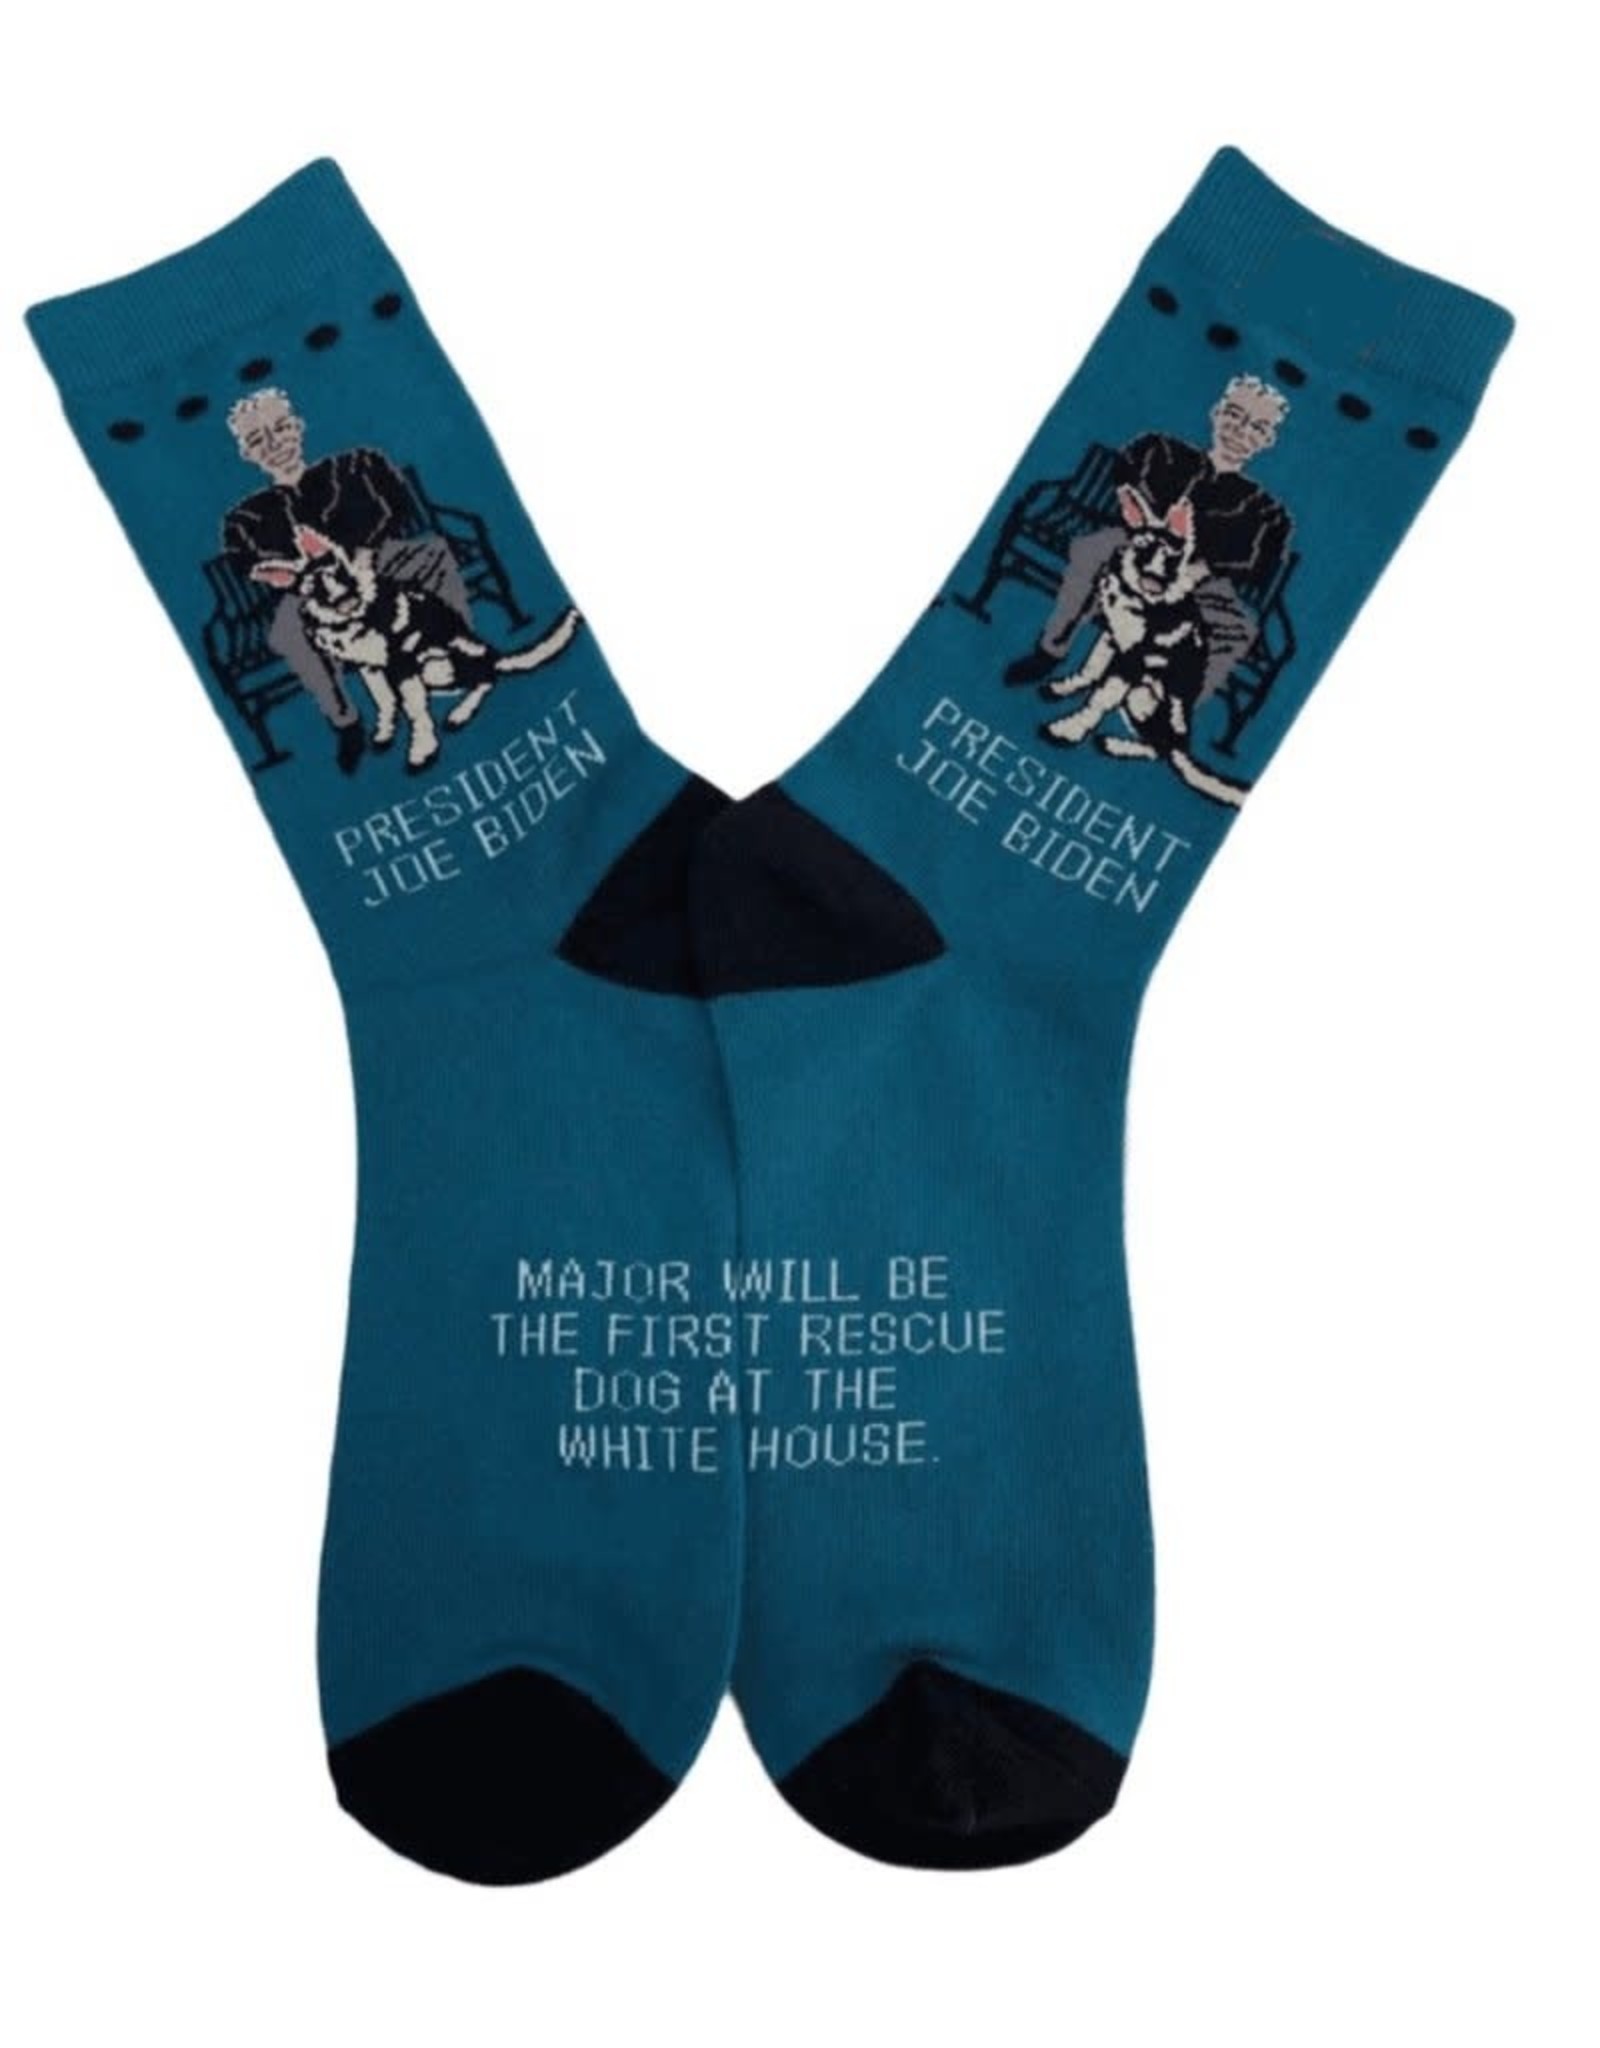 Maggie Stern Stitches Cultural and Political Icon Socks